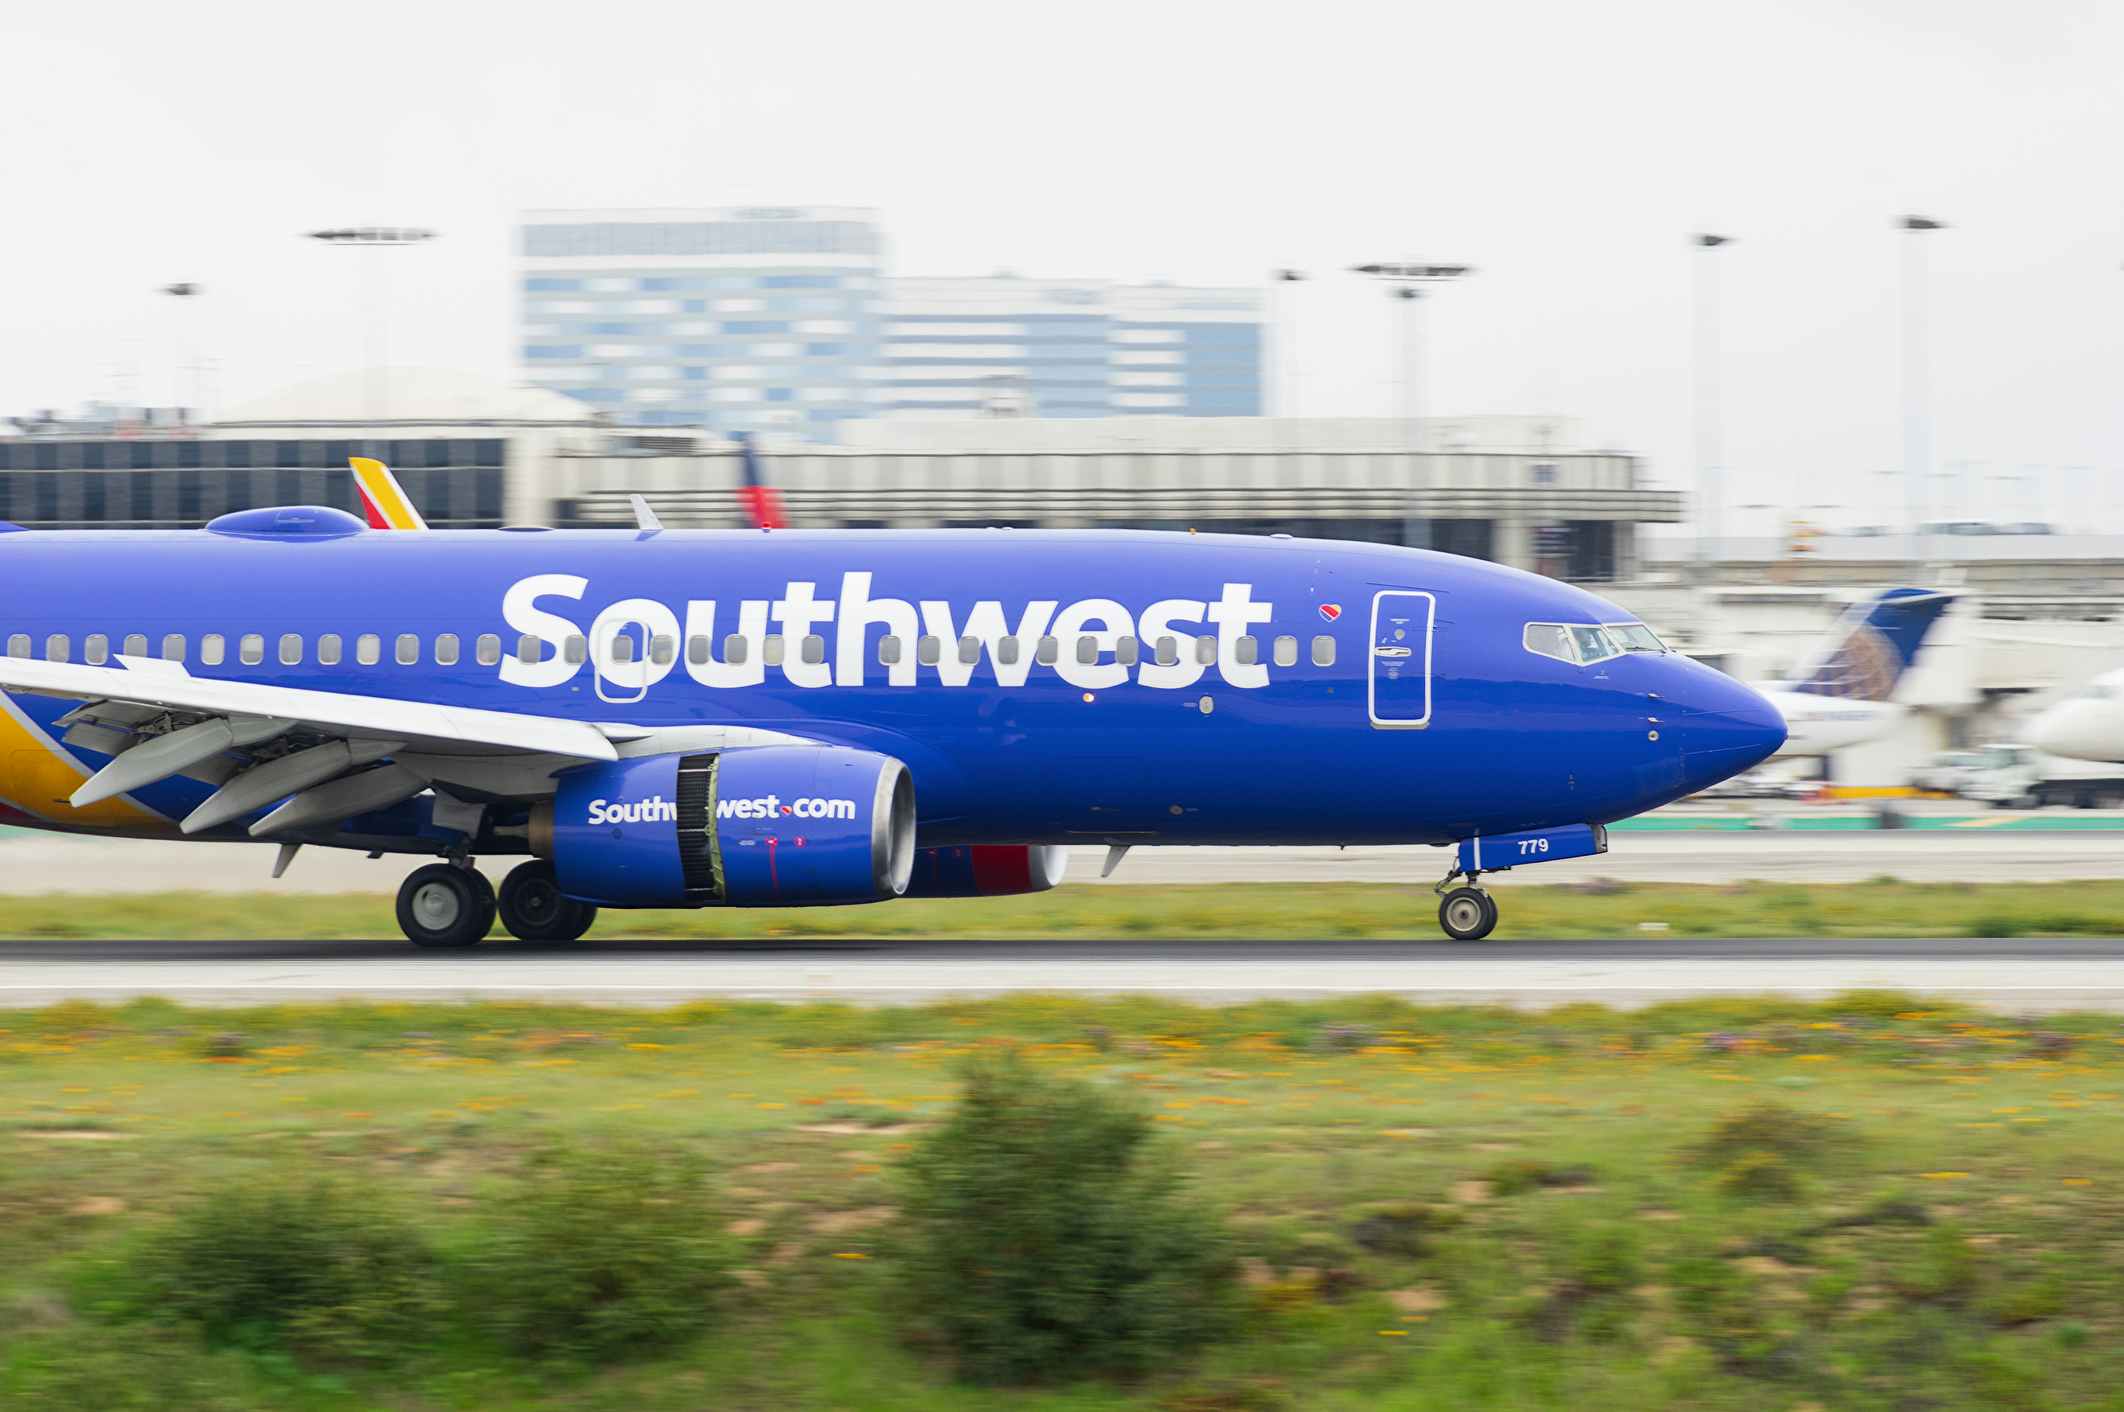 Southwest airlines plane 2020